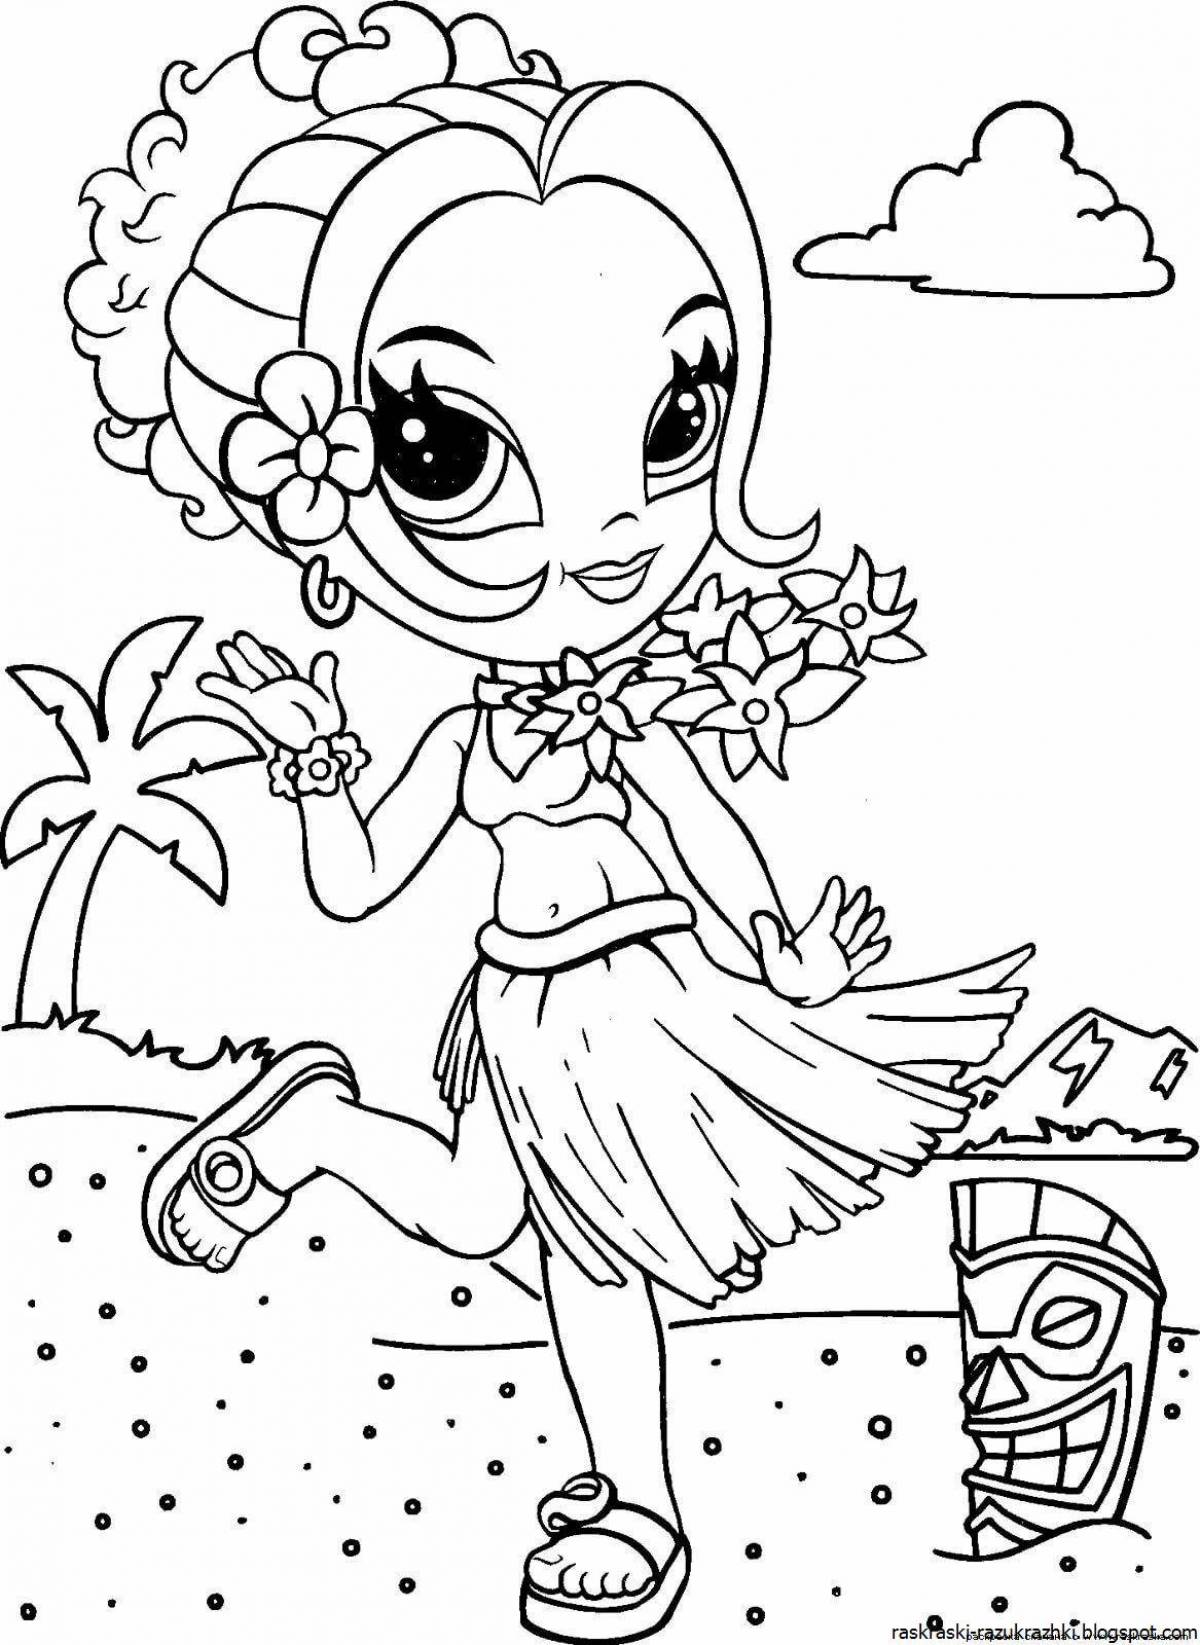 Coloring book for girls 5 years old